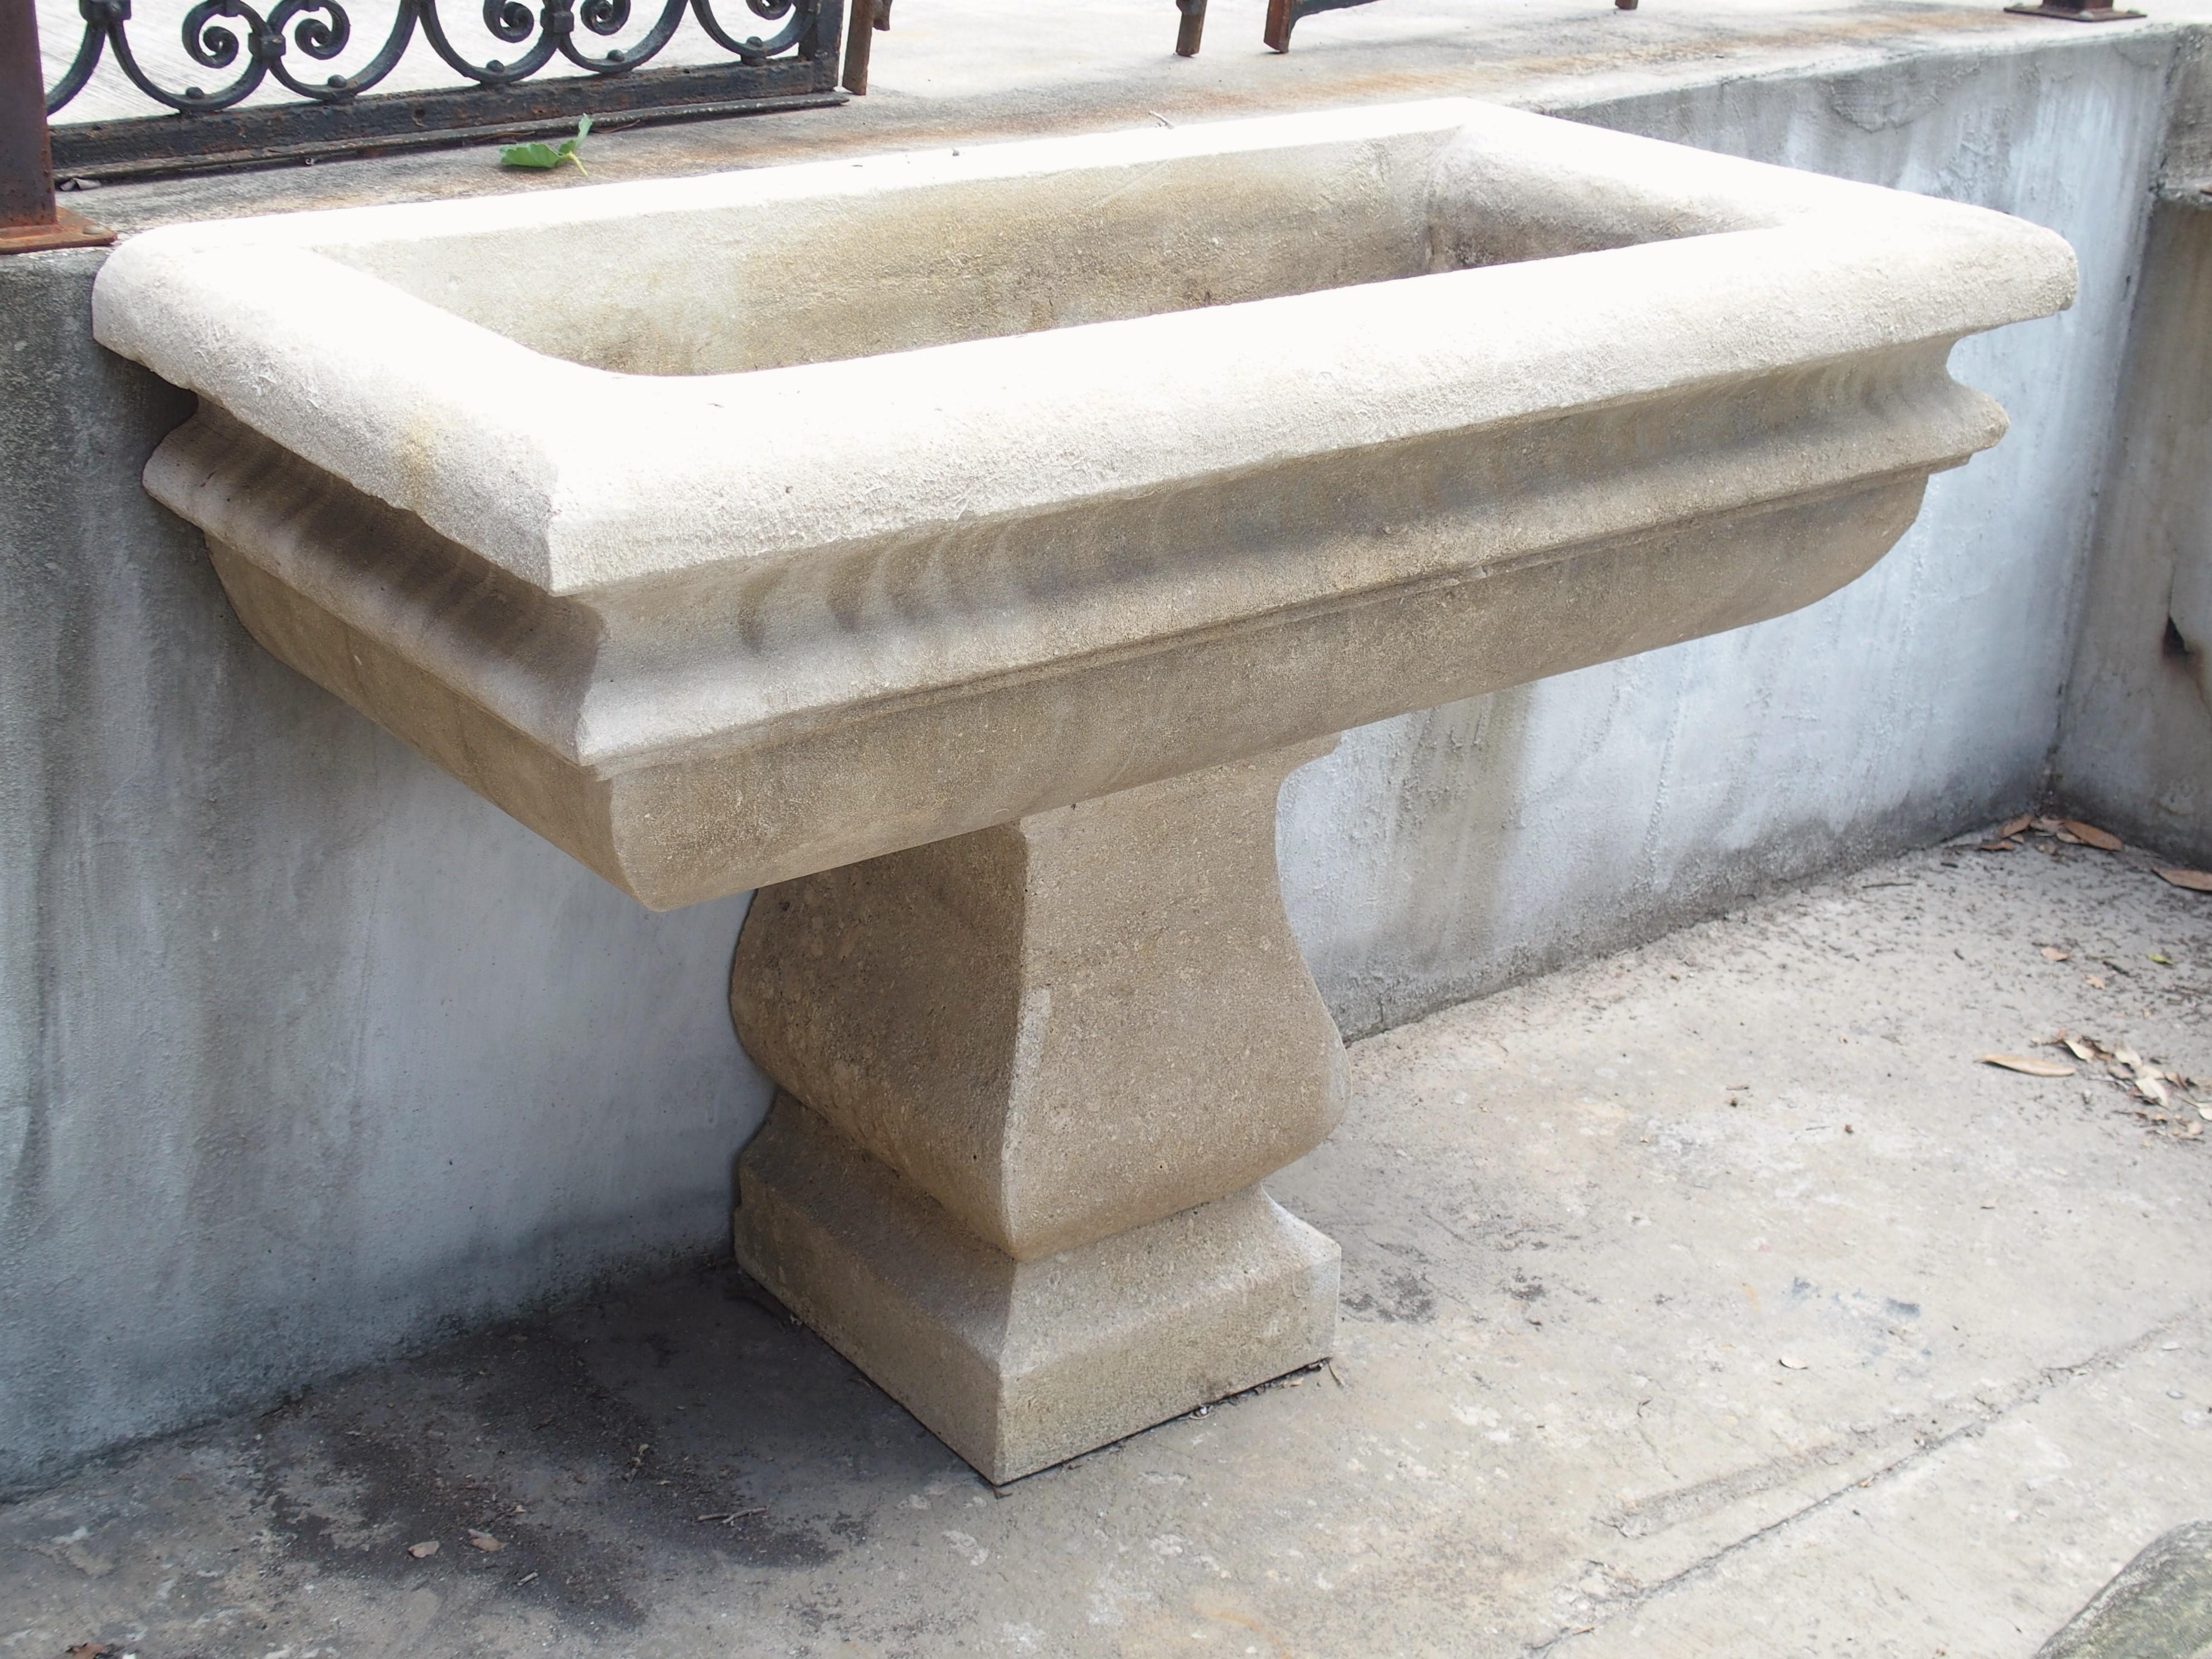 This impressive garden planter was hand-carved from two pieces of solid Italian limestone. The basin features thick quarter round edges with a layer of concave cavetto molding in between. The base is rounded as well, giving the rectangular basin